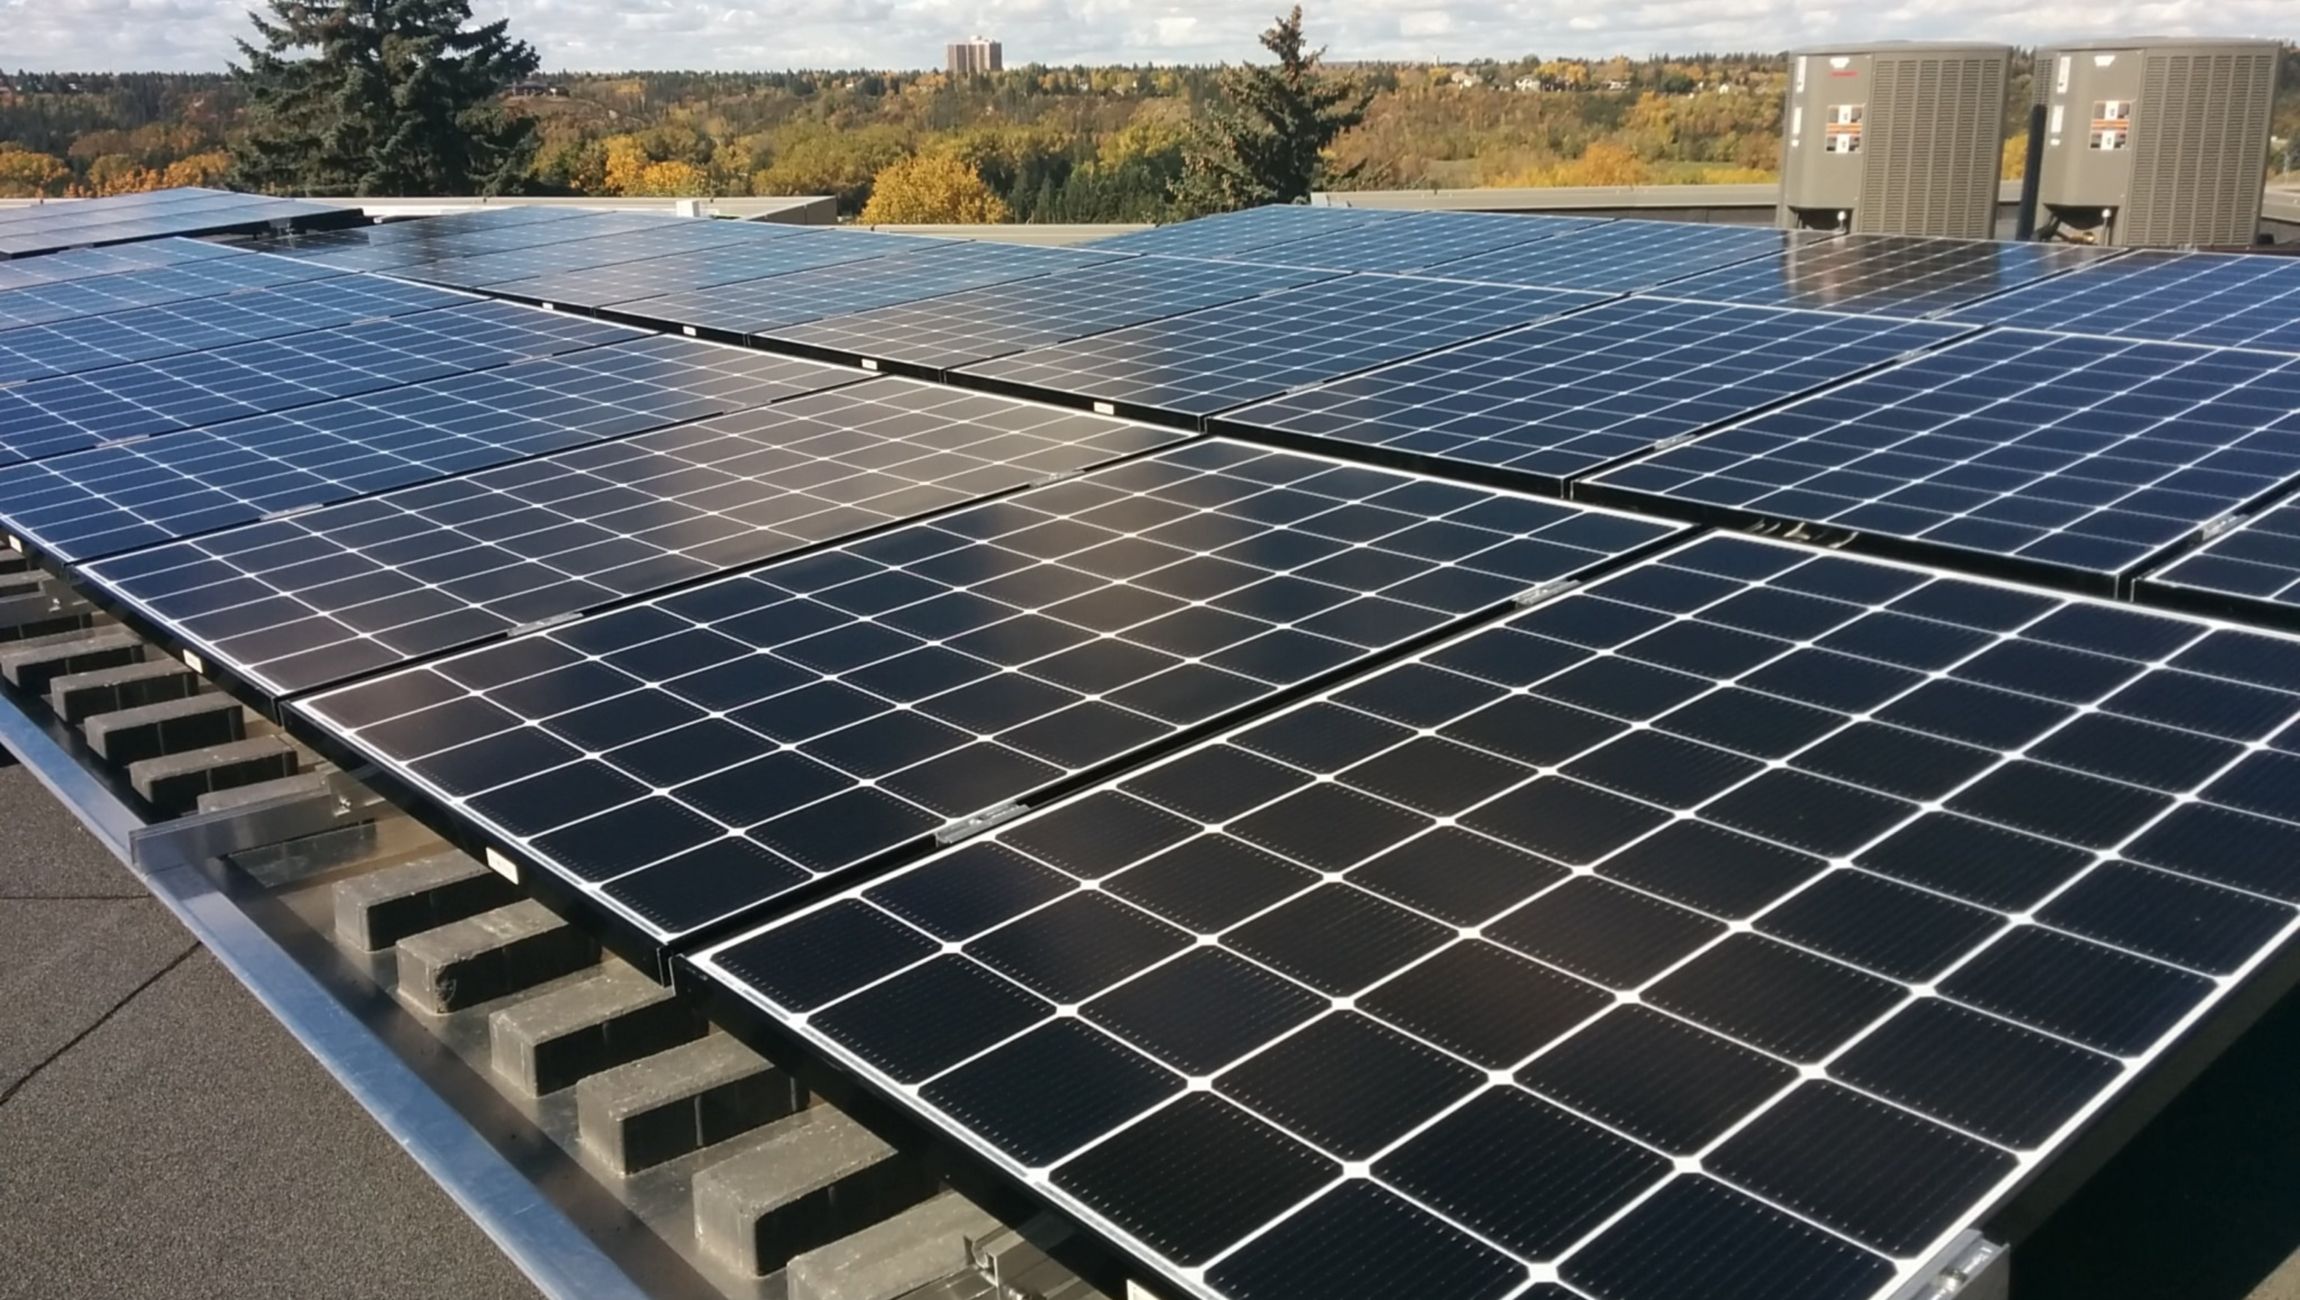 Roof-top solar often provides the lowest cost per wall of installed